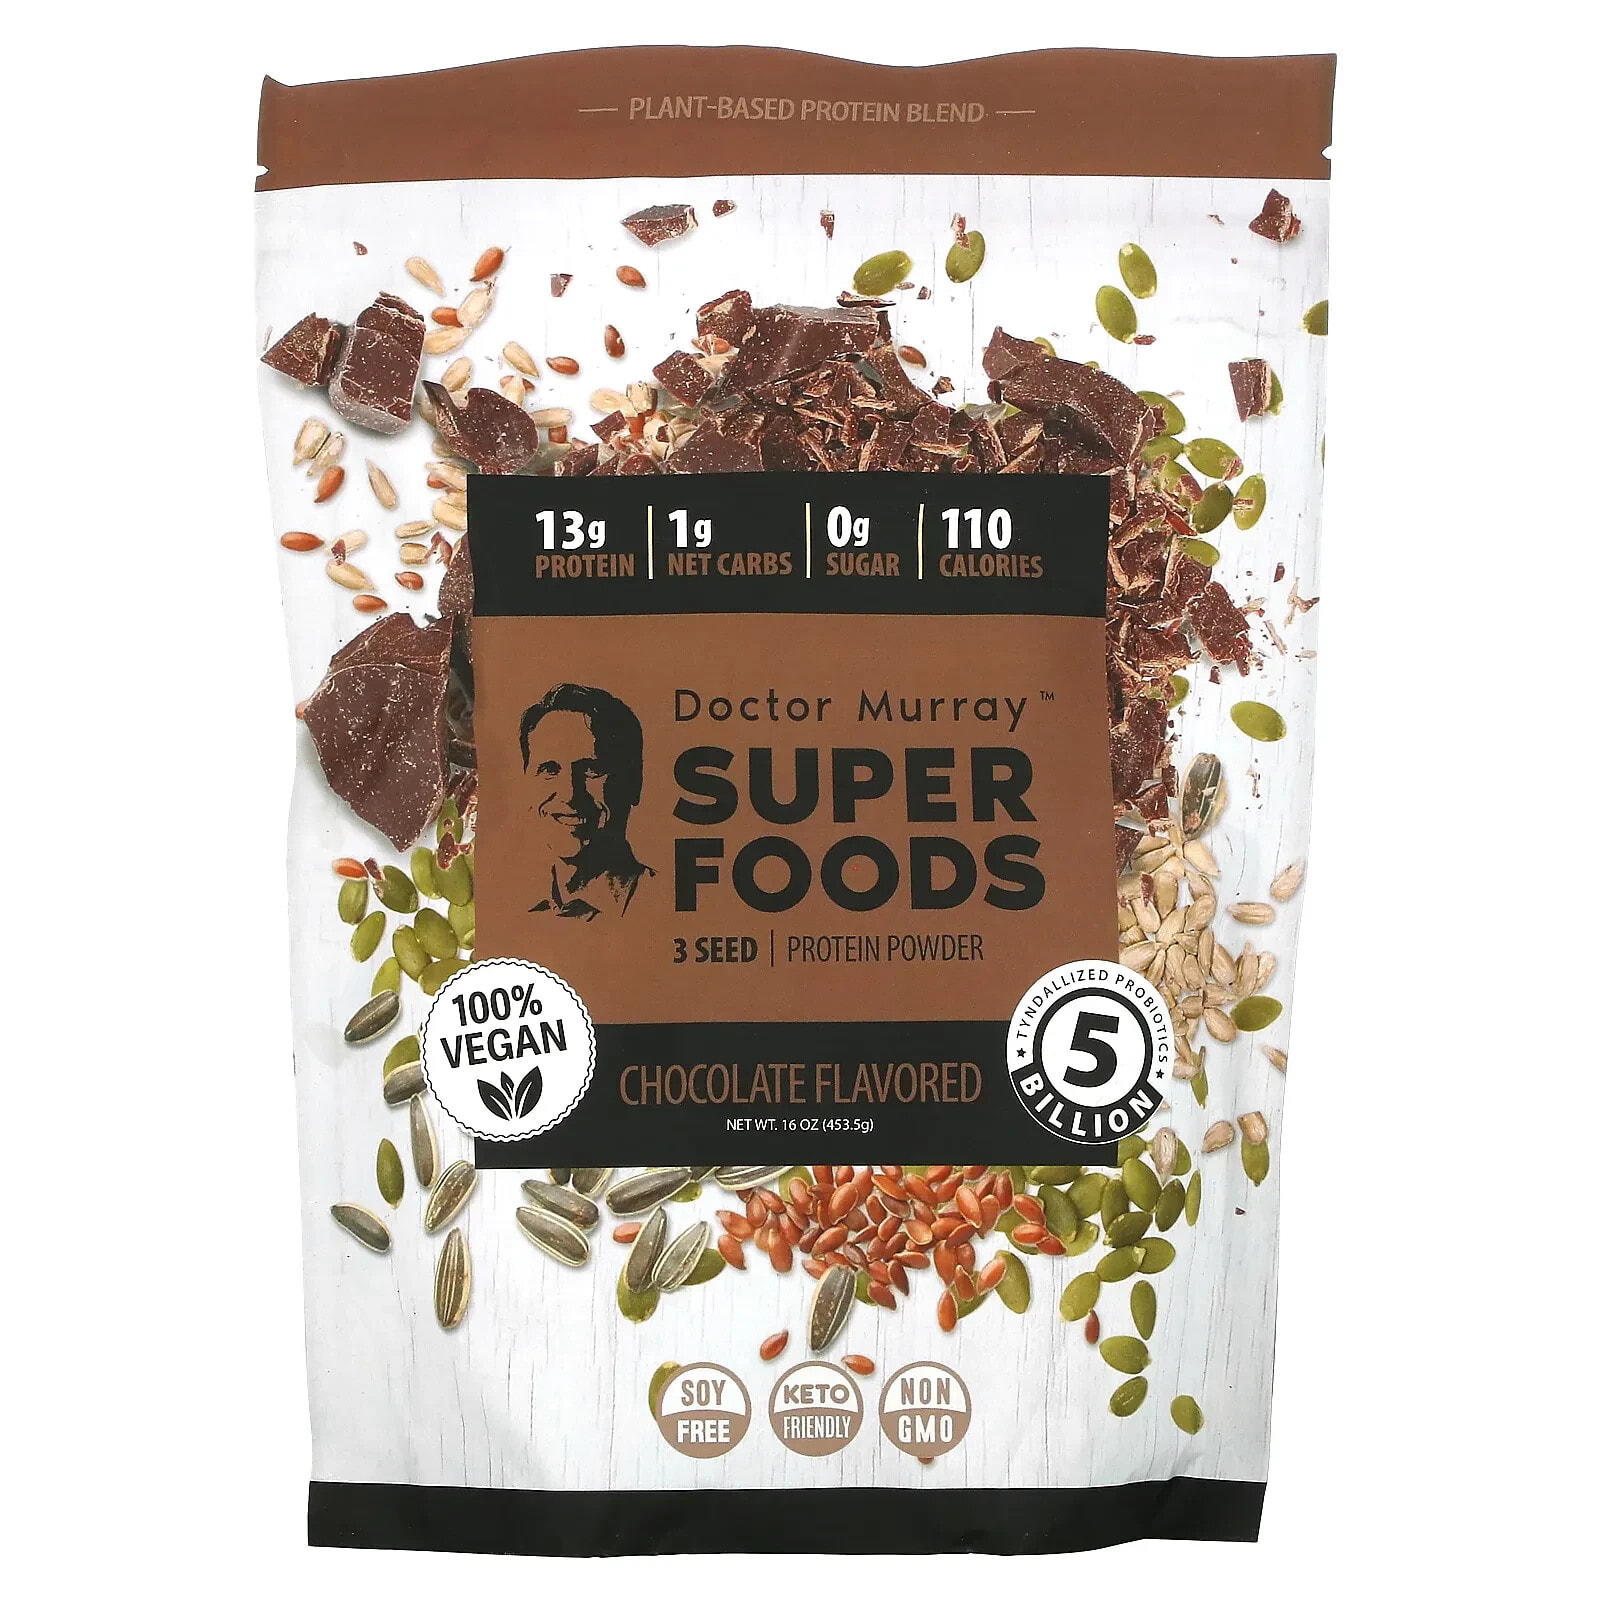 Super Foods, 3 Seed Protein Powder, Unflavored, 16 oz (453.5 g)